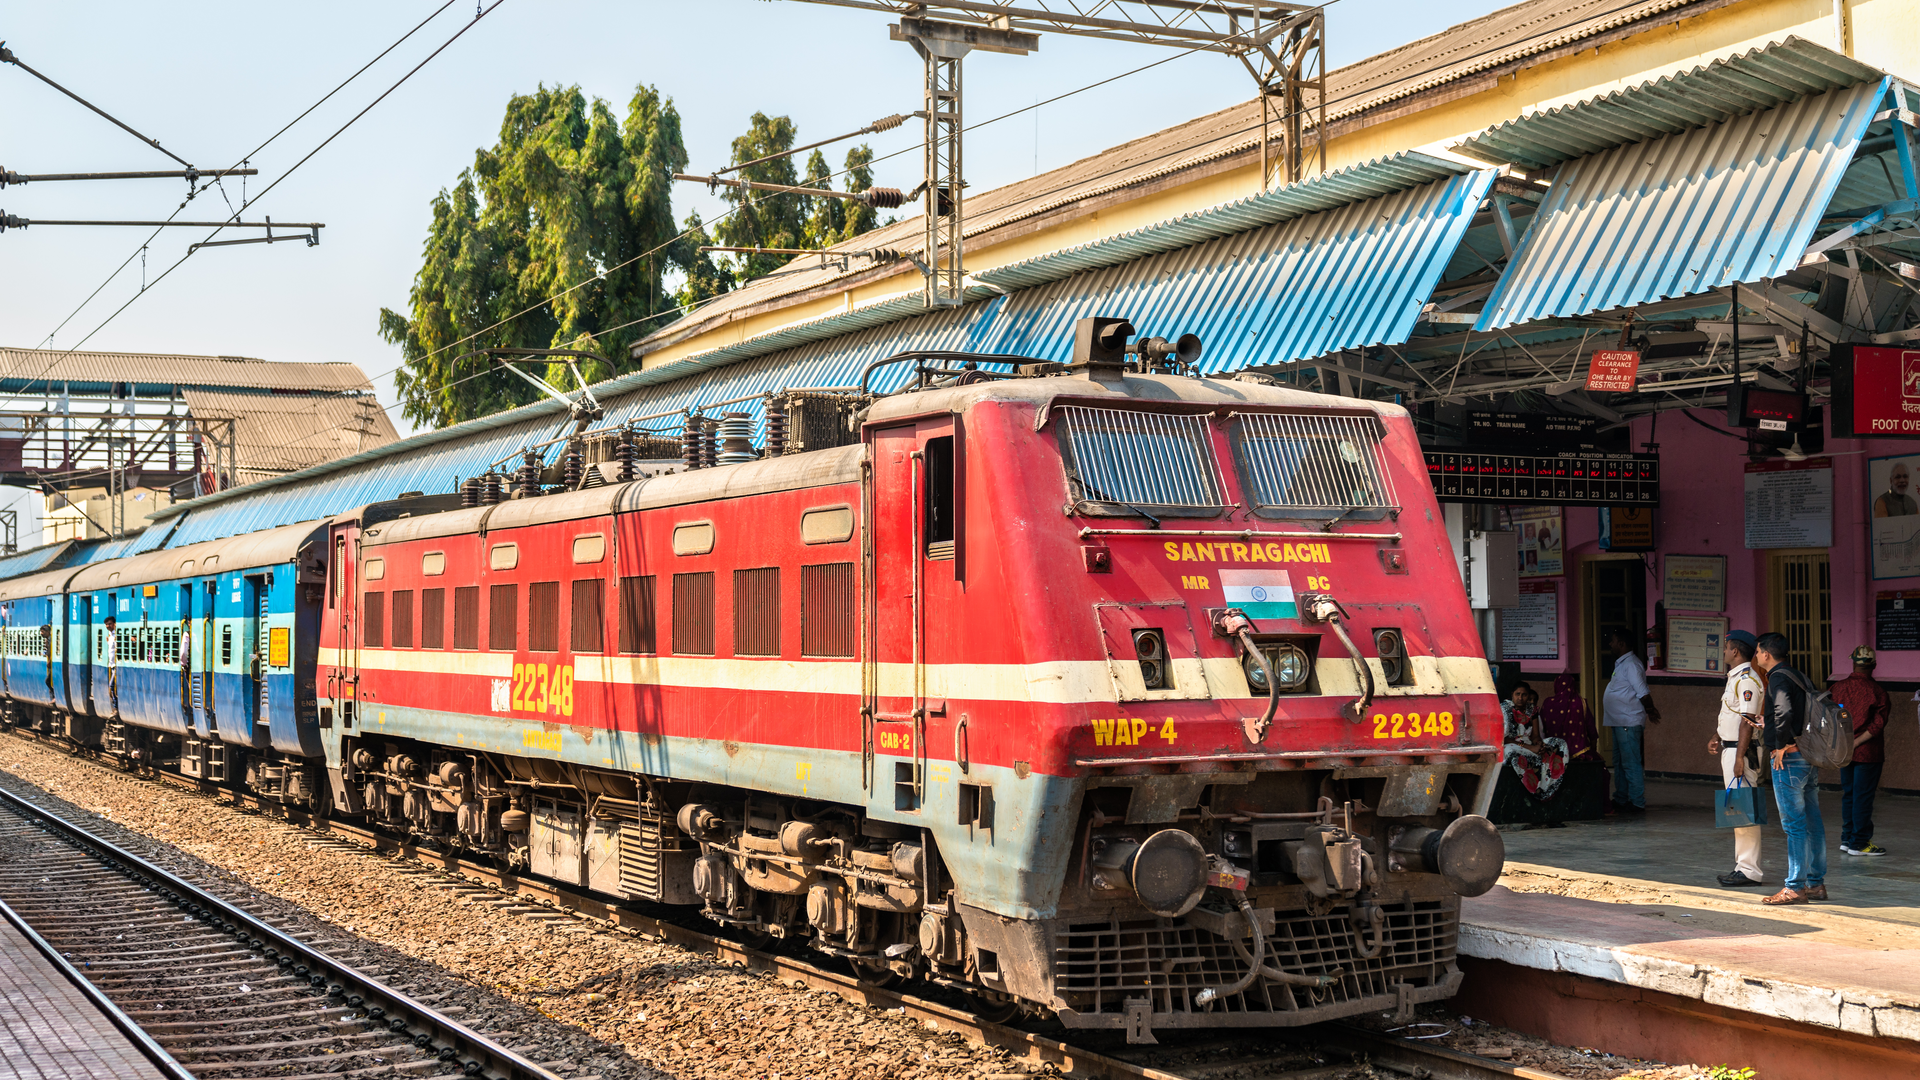 Trains In India Will Be WiFi Enabled In Next 5 Years